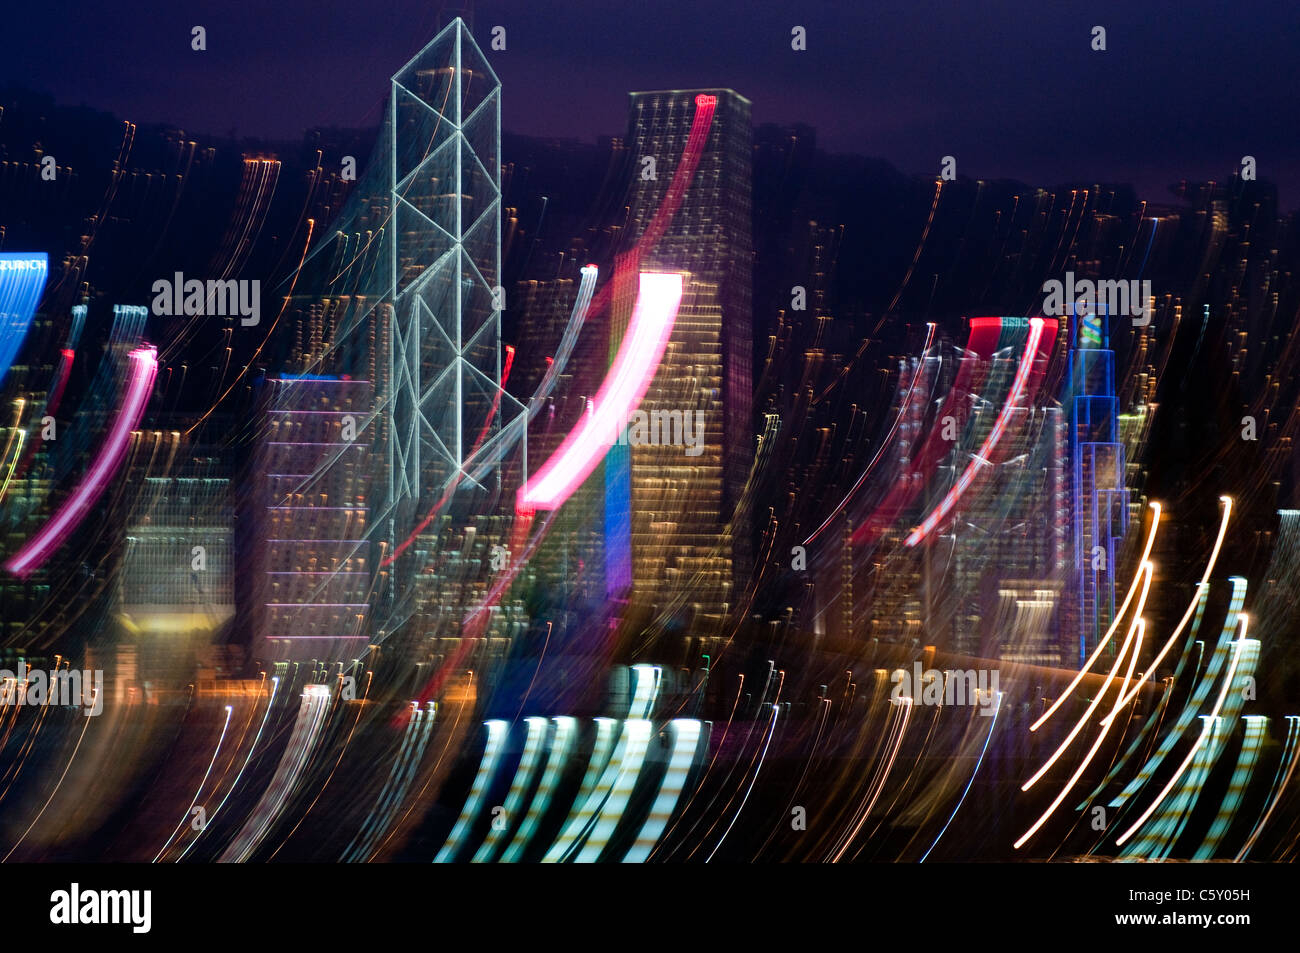 Hong Kong skyline at night with abstract blurred movement of lights Stock Photo